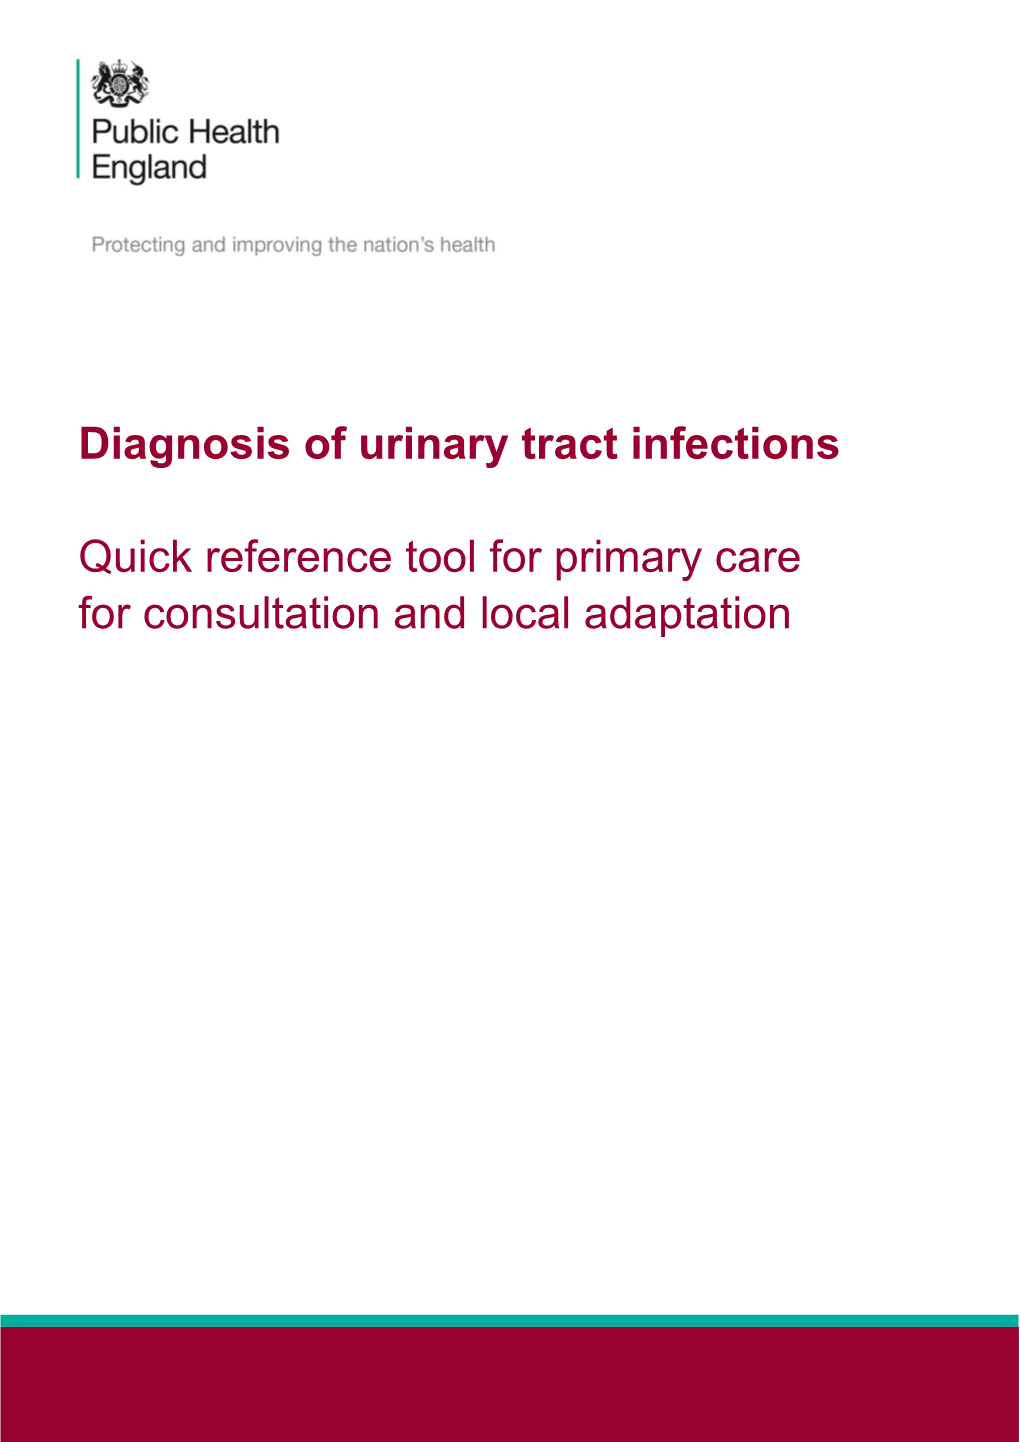 Urinary Tract Infections